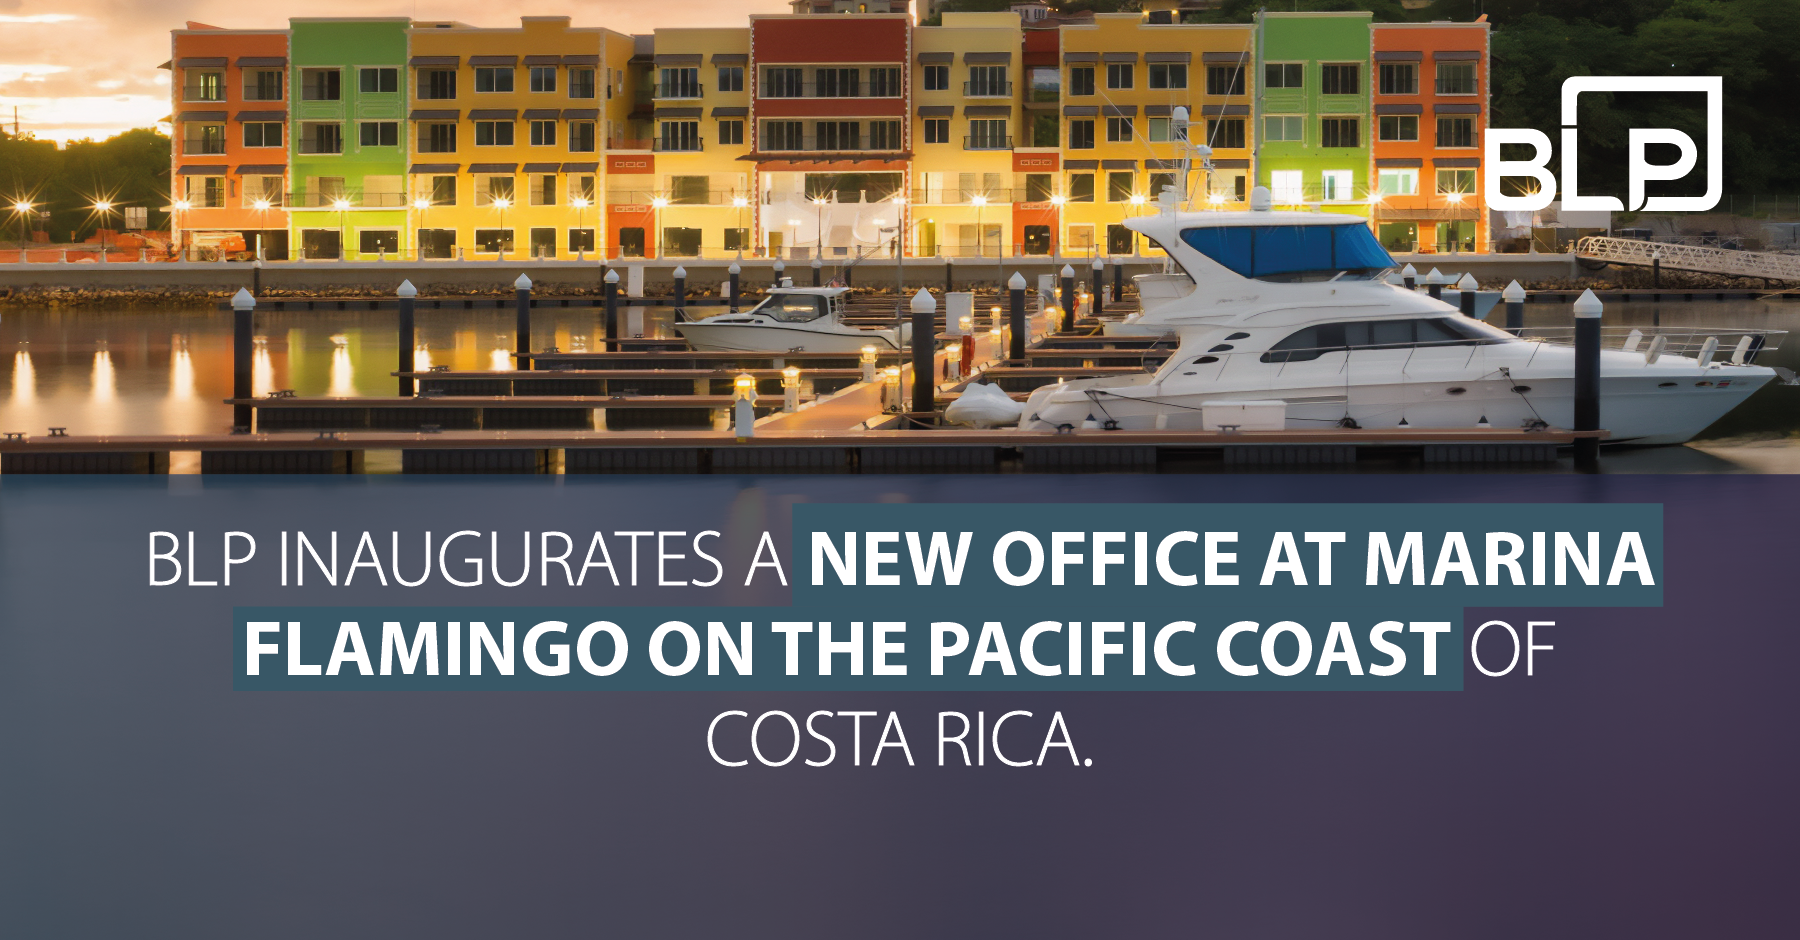 BLP inaugurates a new office at Marina Flamingo on the Pacific coast of Costa Rica